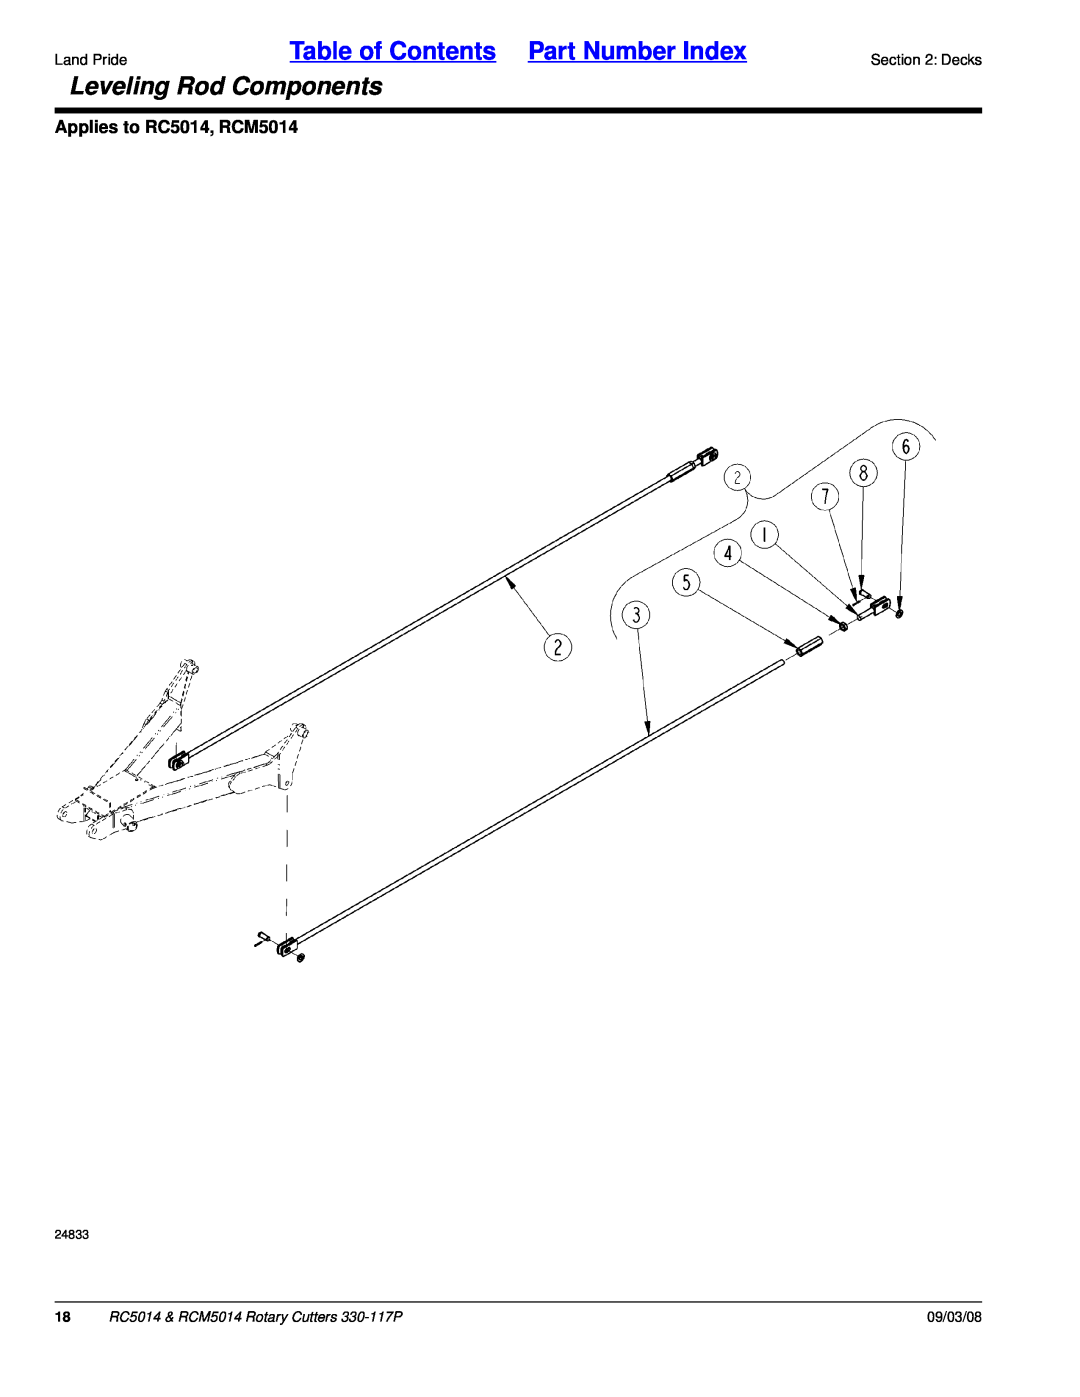 Land Pride manual Leveling Rod Components, Table of Contents Part Number Index, Applies to RC5014, RCM5014, 09/03/08 